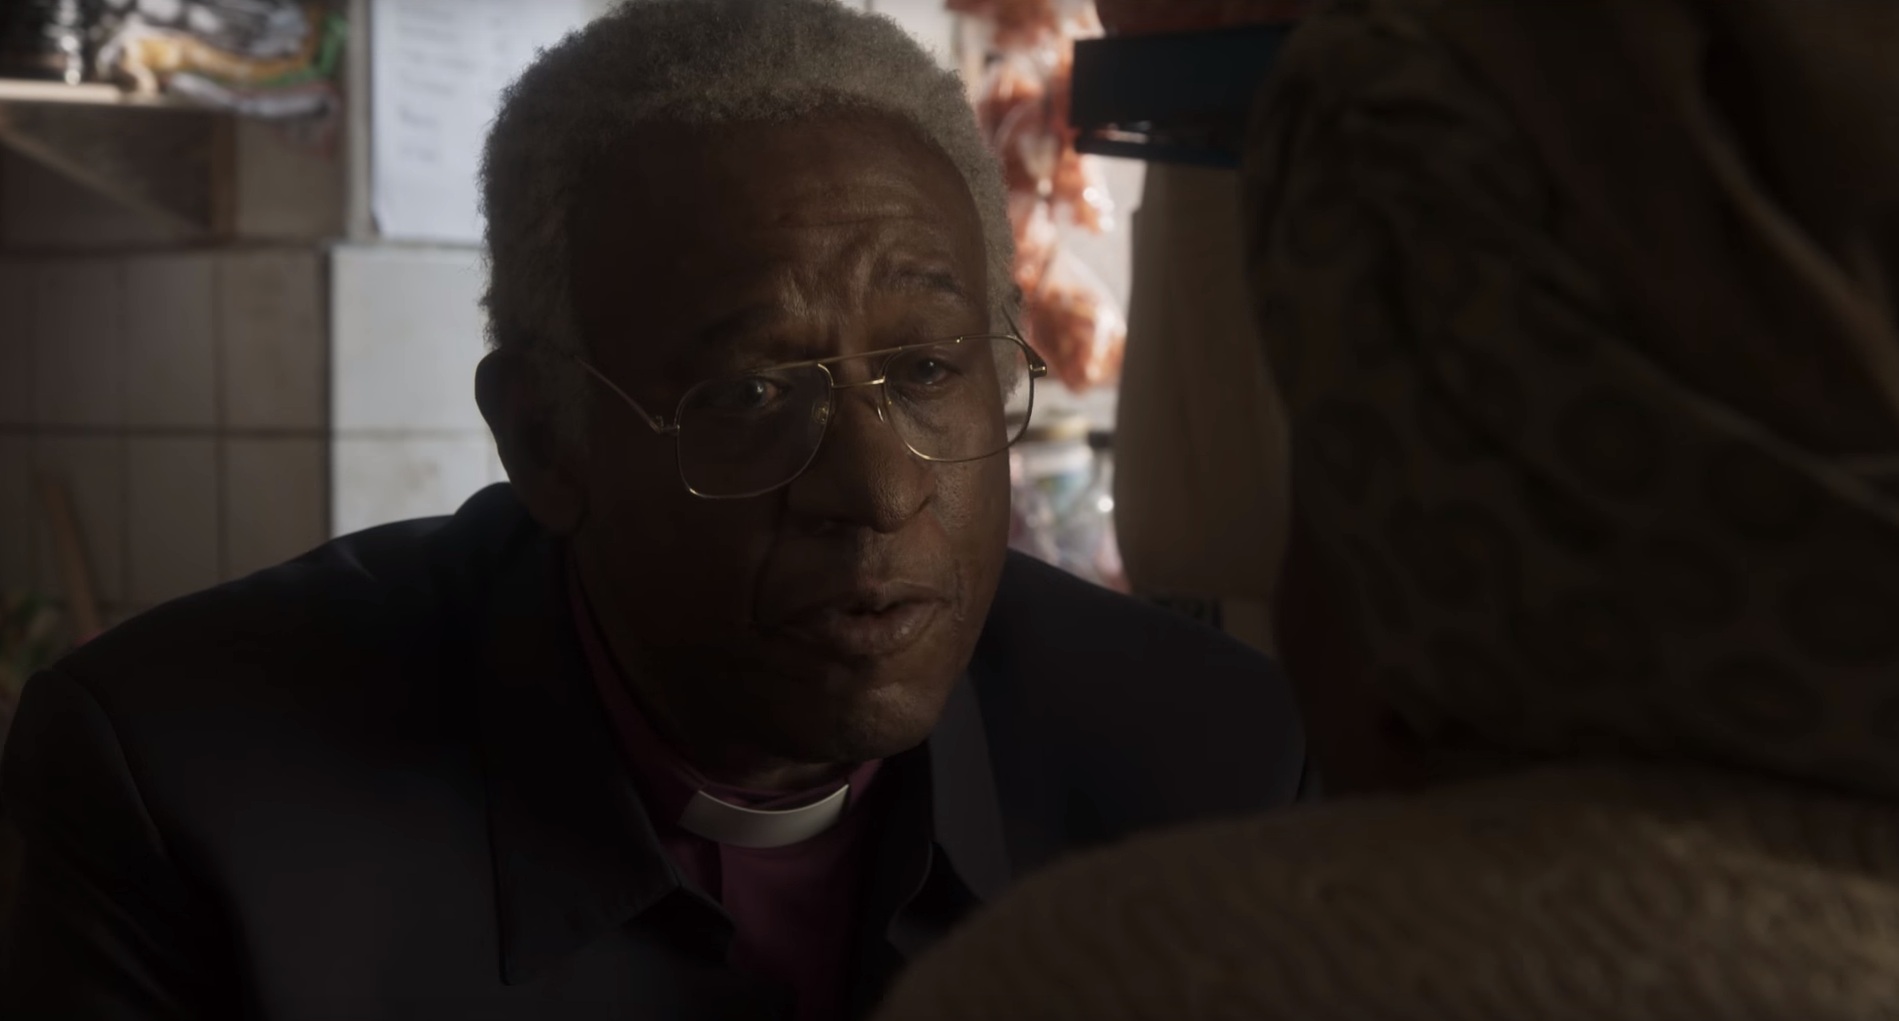 Forest Whitaker more scared of playing Desmond Tutu than Idi Amin